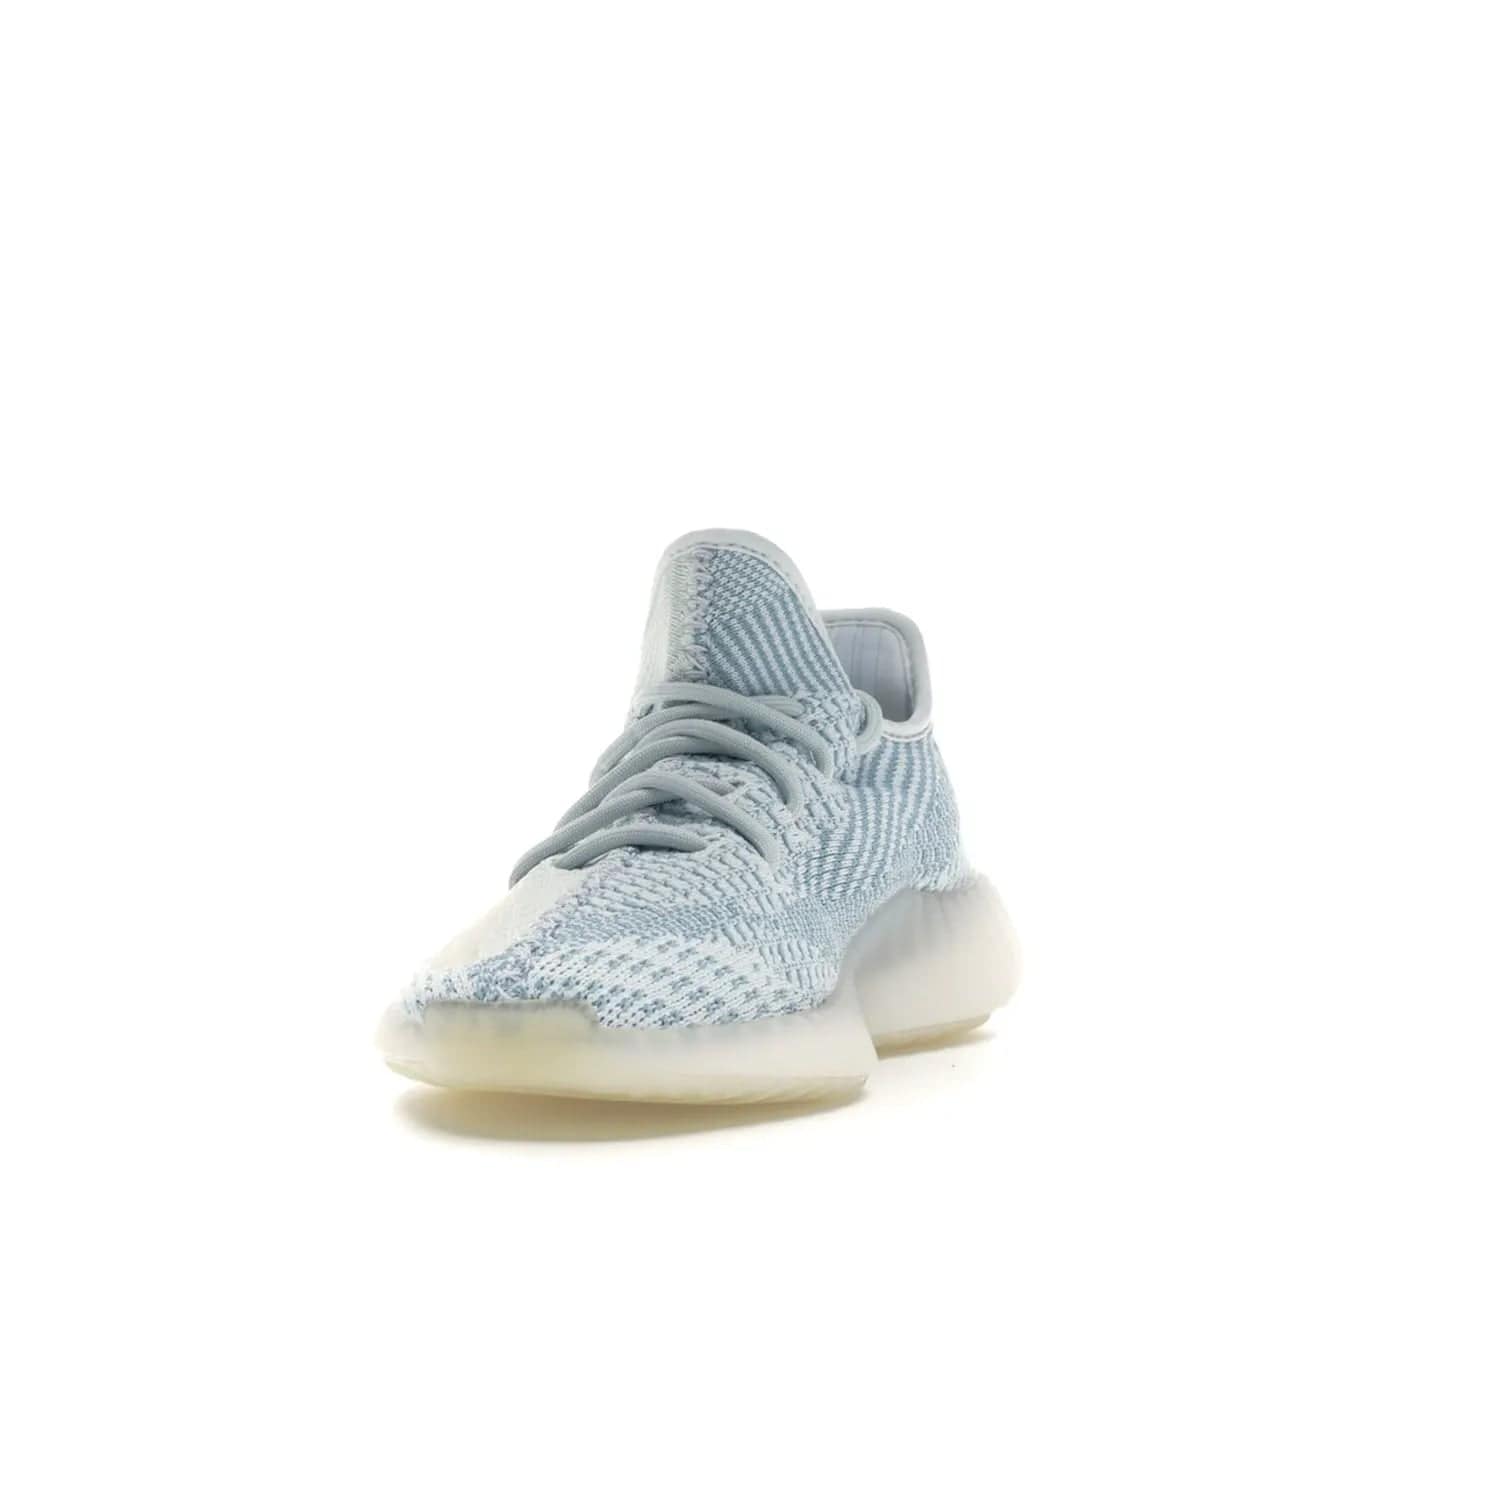 adidas Yeezy Boost 350 V2 Cloud White (Non-Reflective) - Image 12 - Only at www.BallersClubKickz.com - Uniquely designed adidas Yeezy Boost 350 V2 Cloud White (Non-Reflective) with a Primeknit upper in shades of cream and blue with a contrasting hard sole. A fashion-forward sneaker with a transparent strip and blue-and-white patterns.